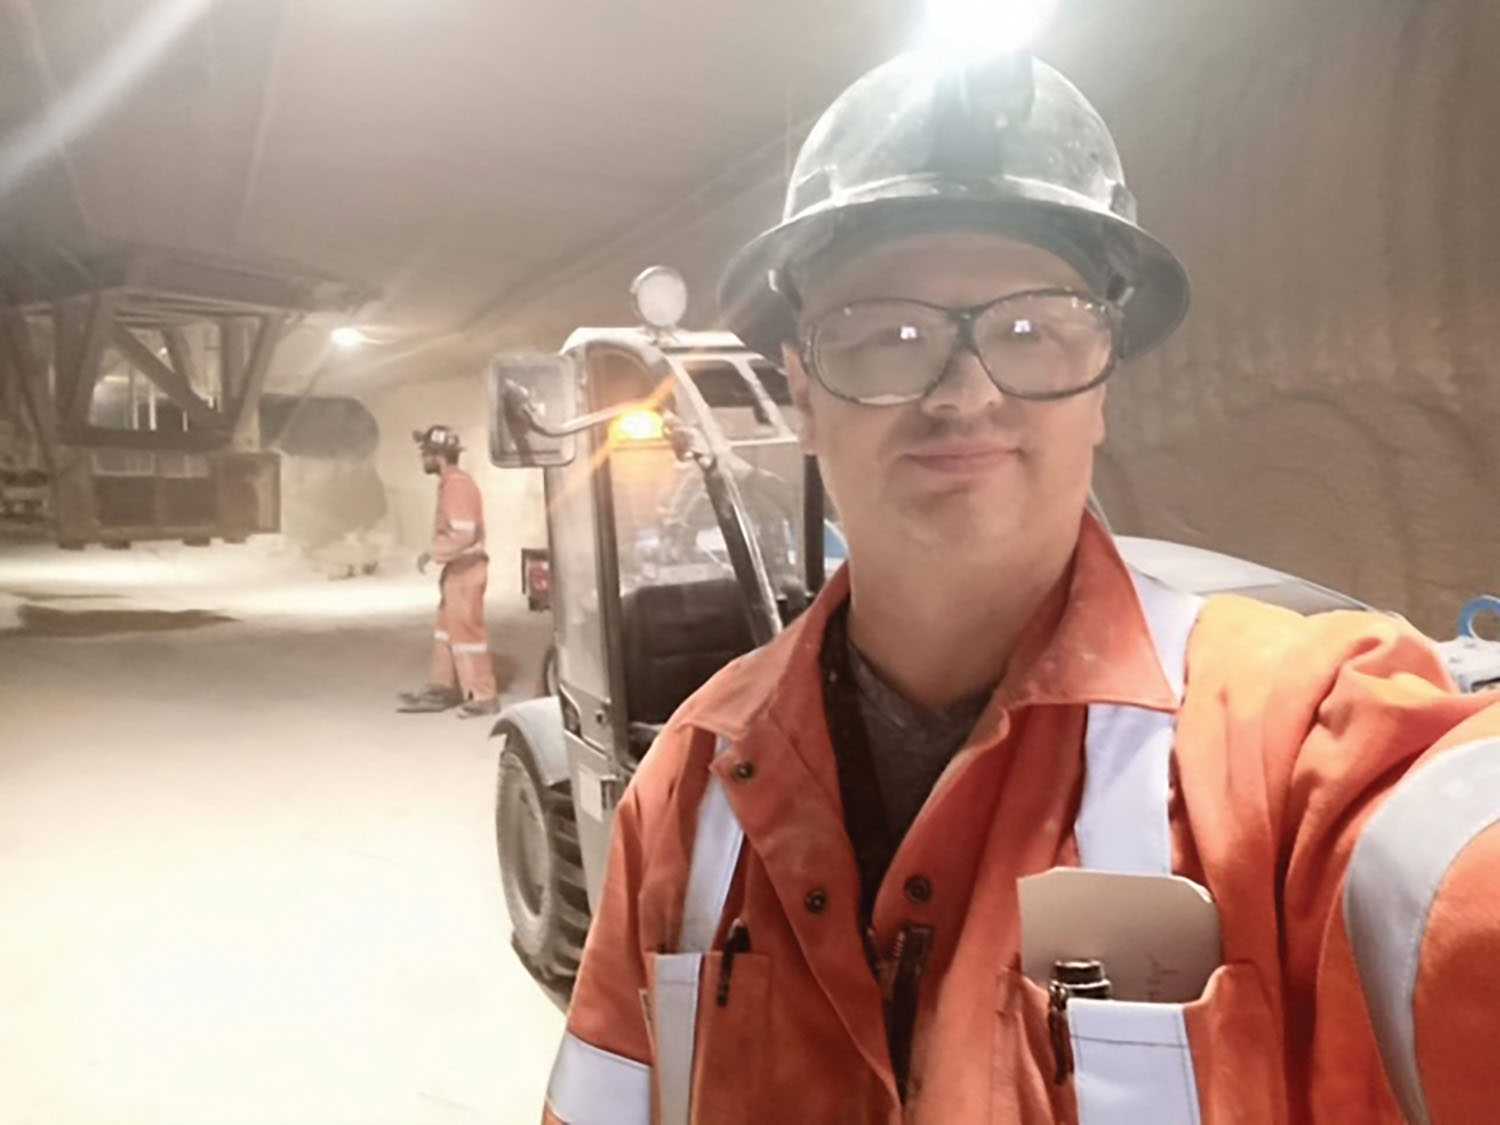 Valentyn Karpenko arrived in Moosomin in May and is working at the Nutien Rocanville mine site.